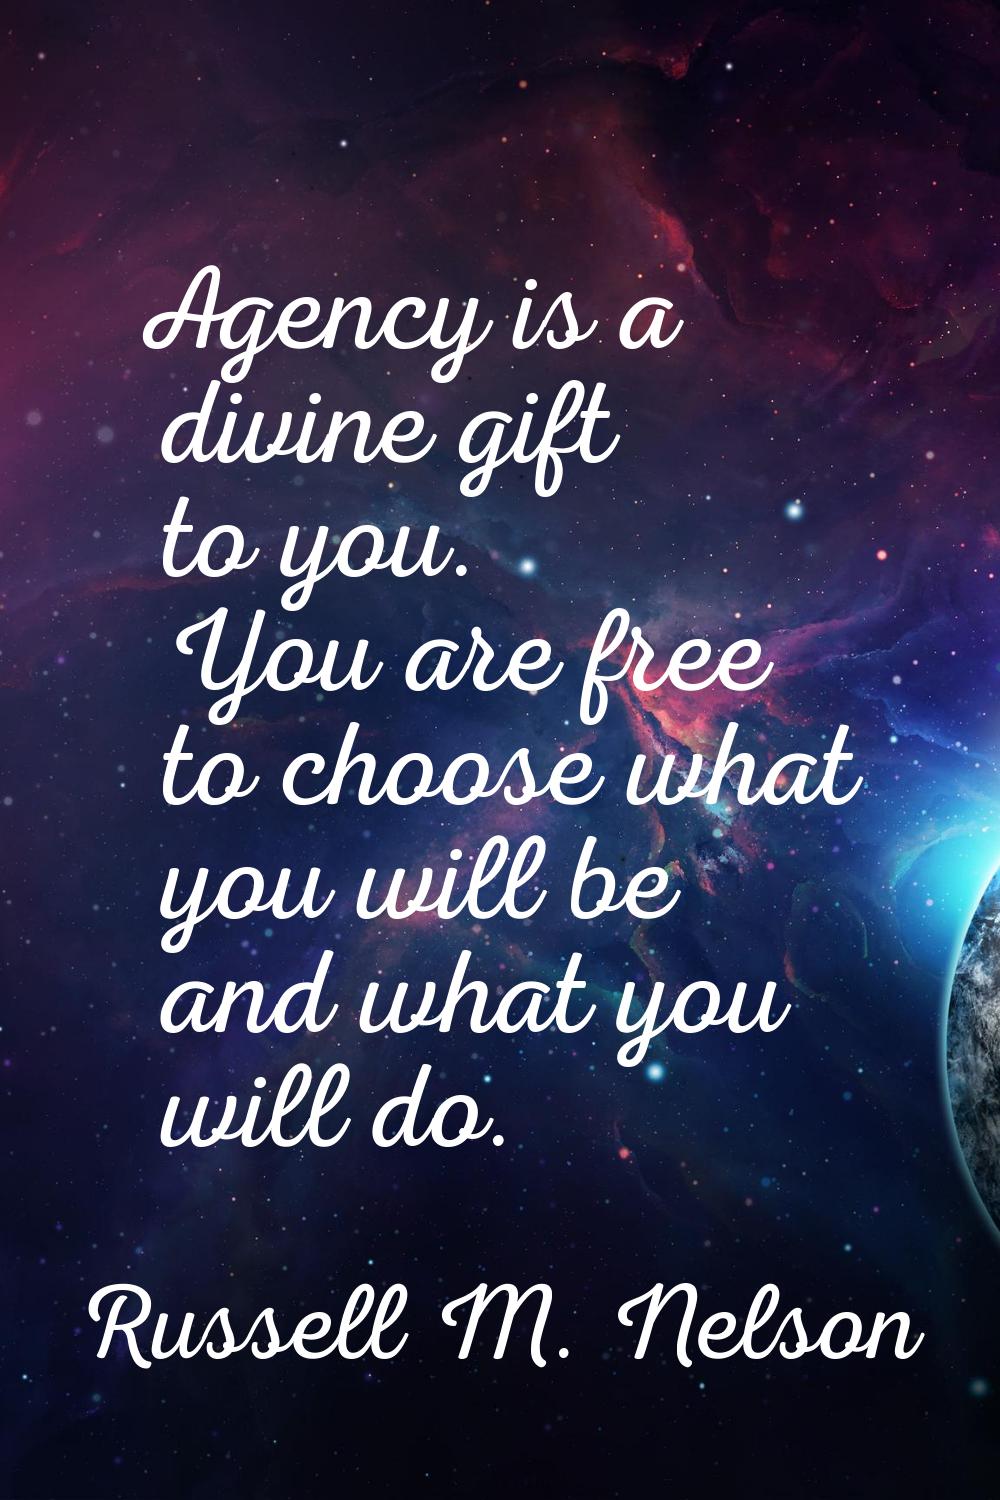 Agency is a divine gift to you. You are free to choose what you will be and what you will do.